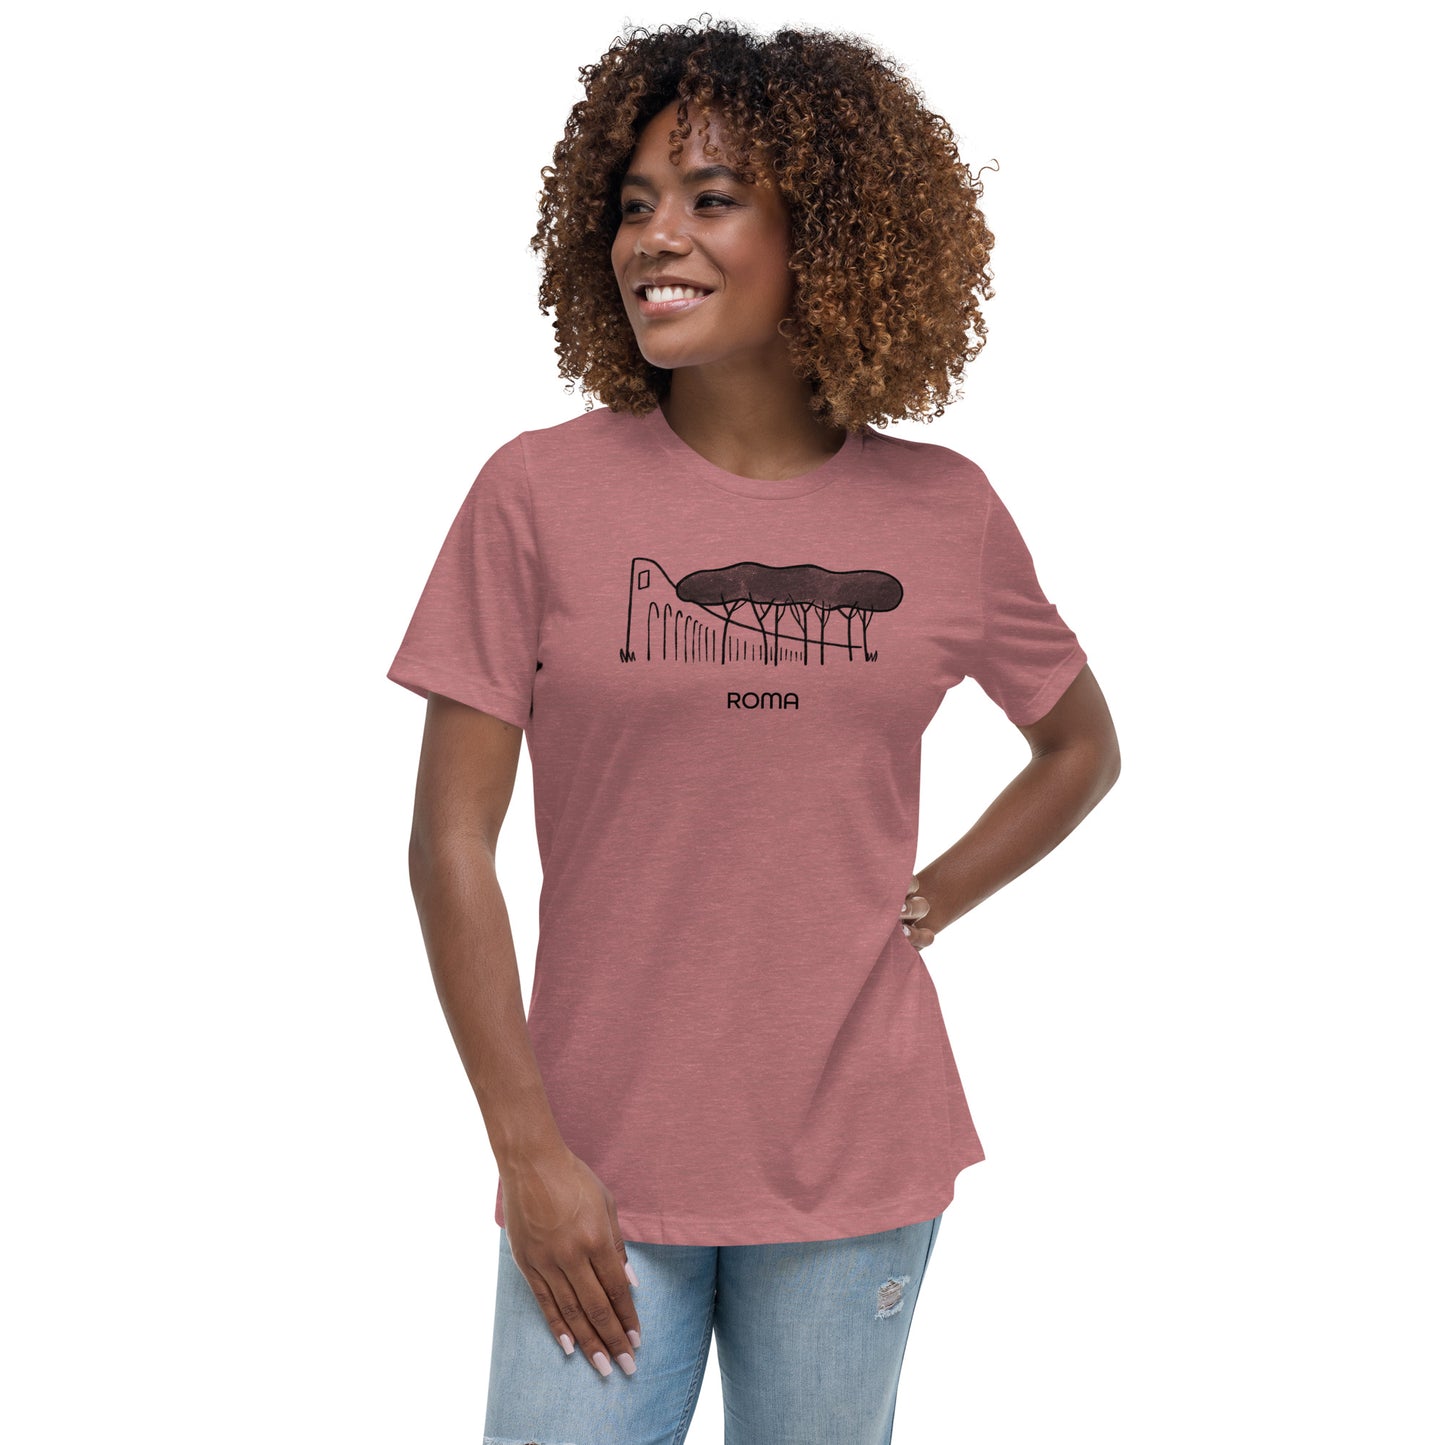 Roman Pine Trees on a Women's Relaxed T-Shirt